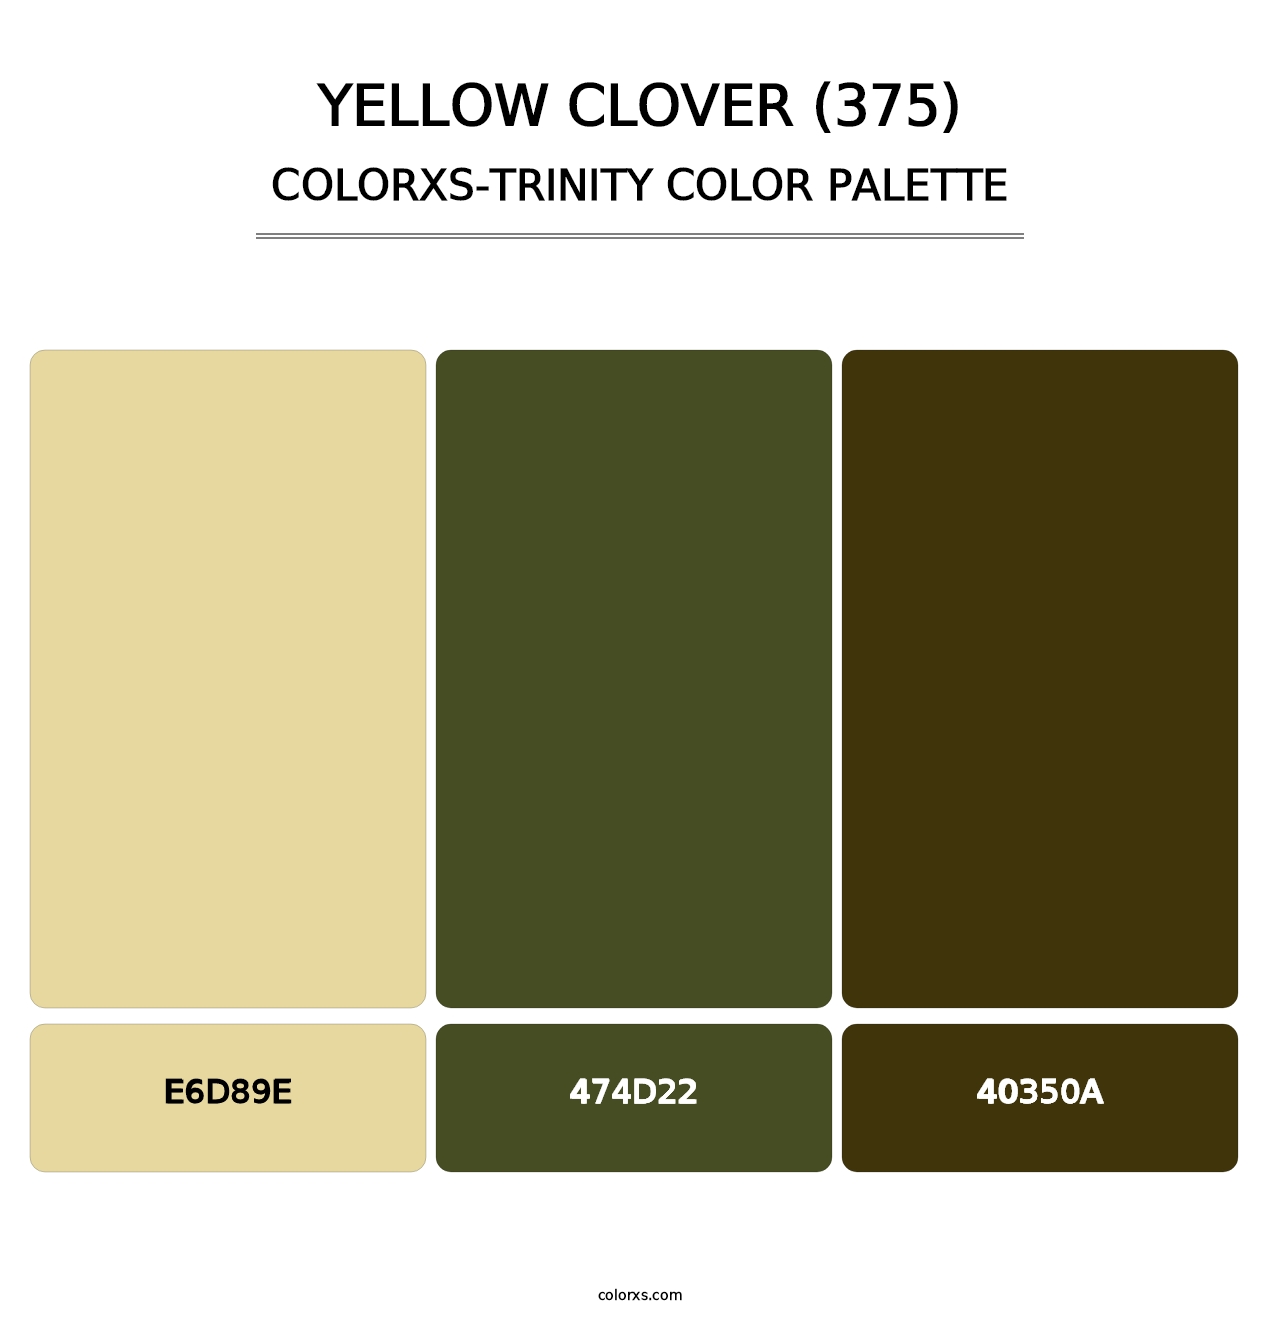 Yellow Clover (375) - Colorxs Trinity Palette